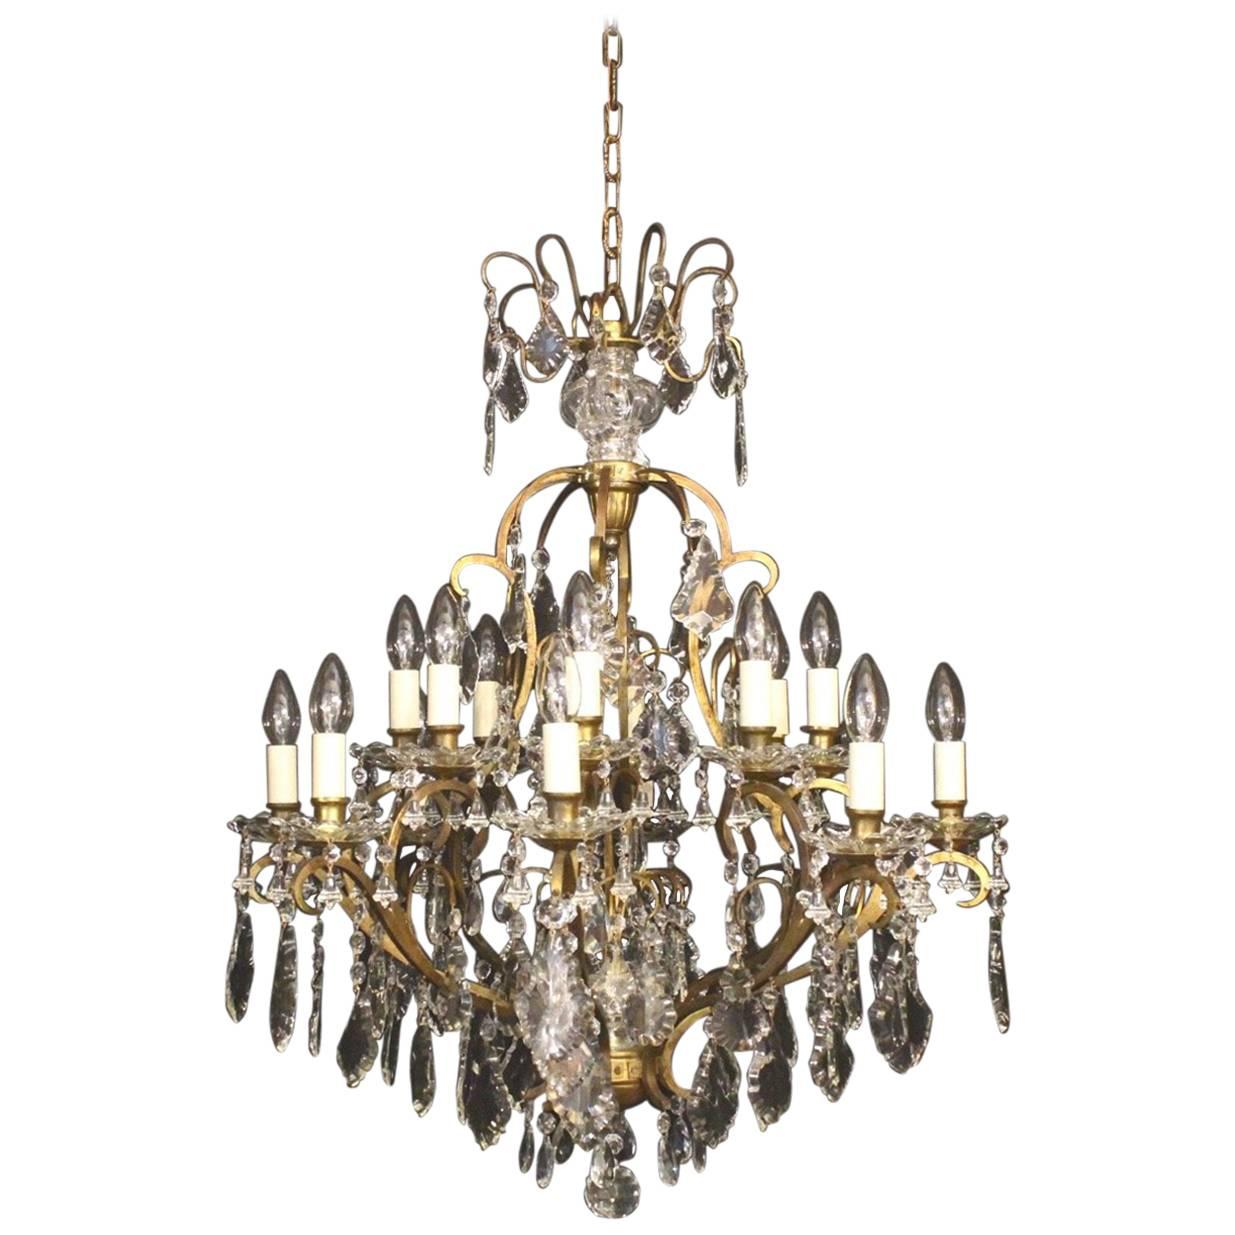 French Sixteen-Light Antique Cage Antique Chandelier